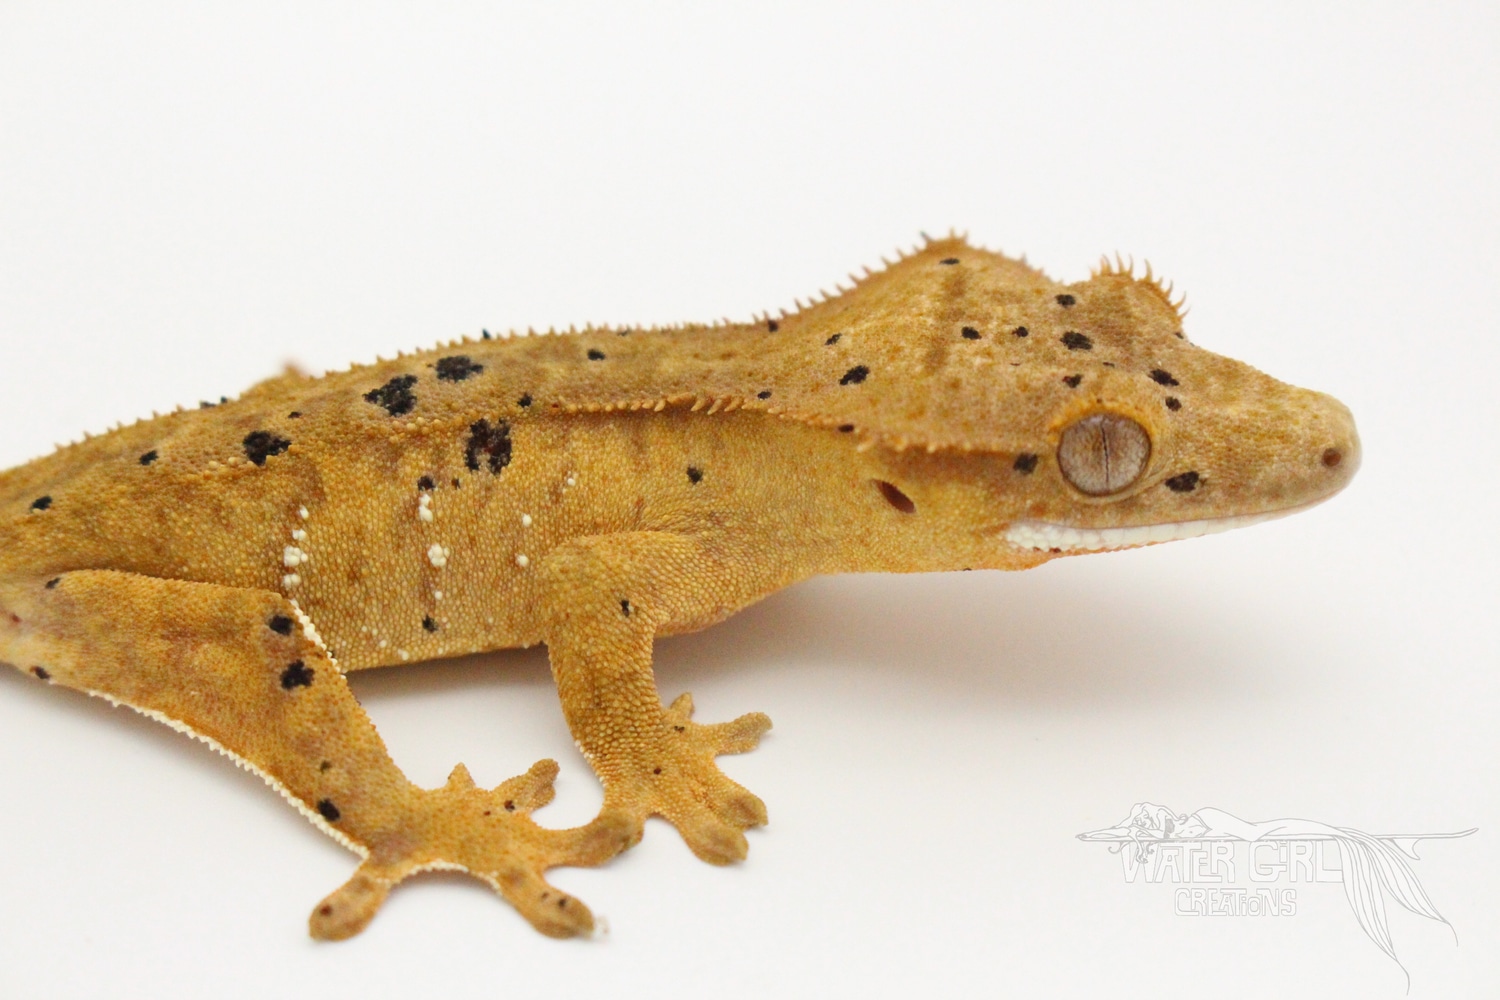 Ink Spot Dalmatian Tangerine Orange Possible Female Crested Gecko by Water Girl Creations